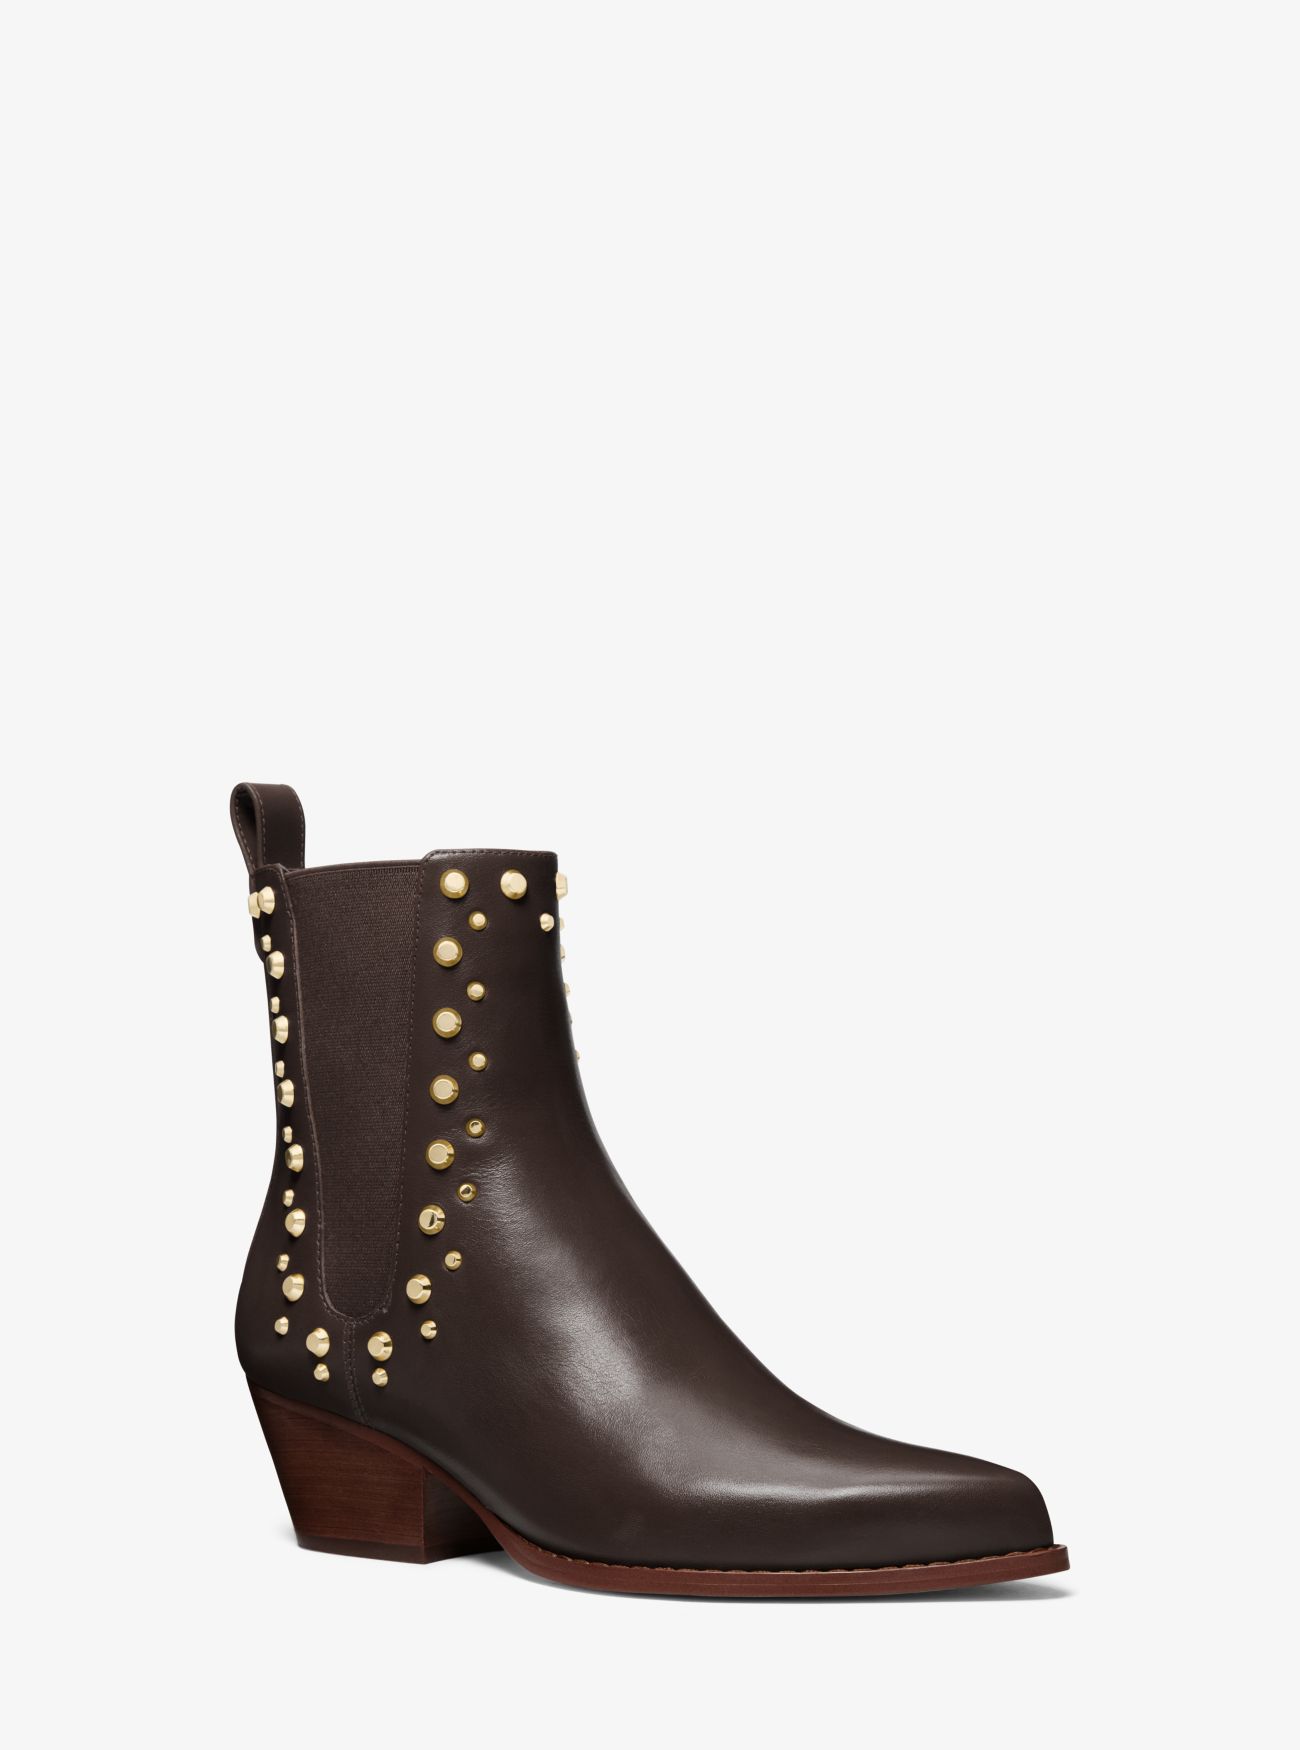 MK Kinlee Astor Studded Leather Ankle Boot - Brown - Michael Kors